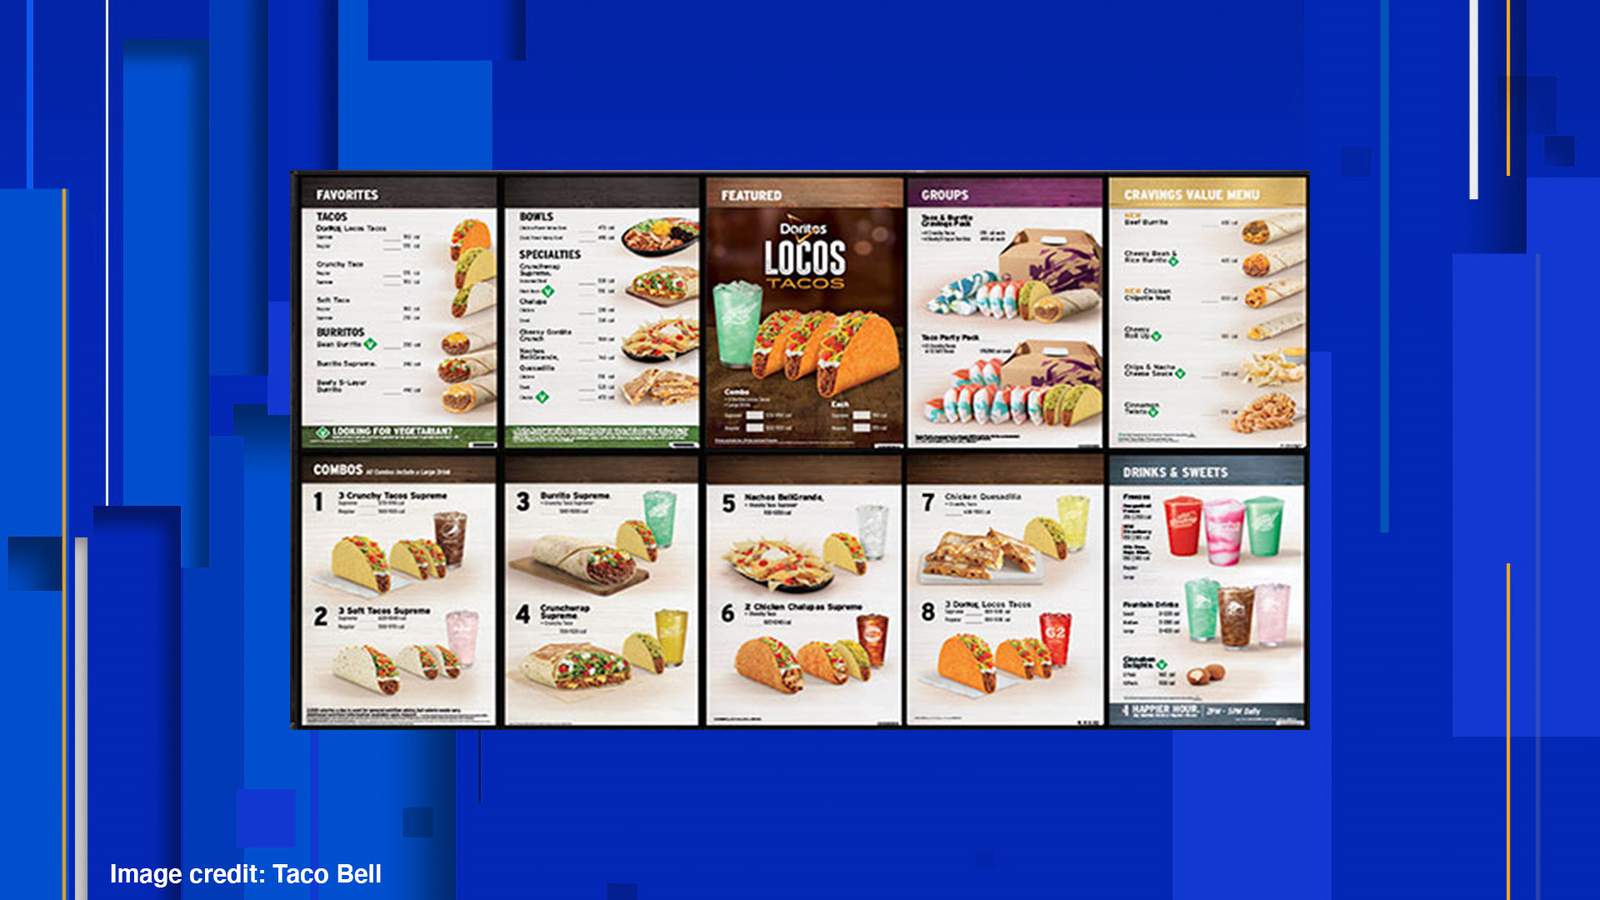 Taco Bell removing even more items from its menu starting Nov. 5